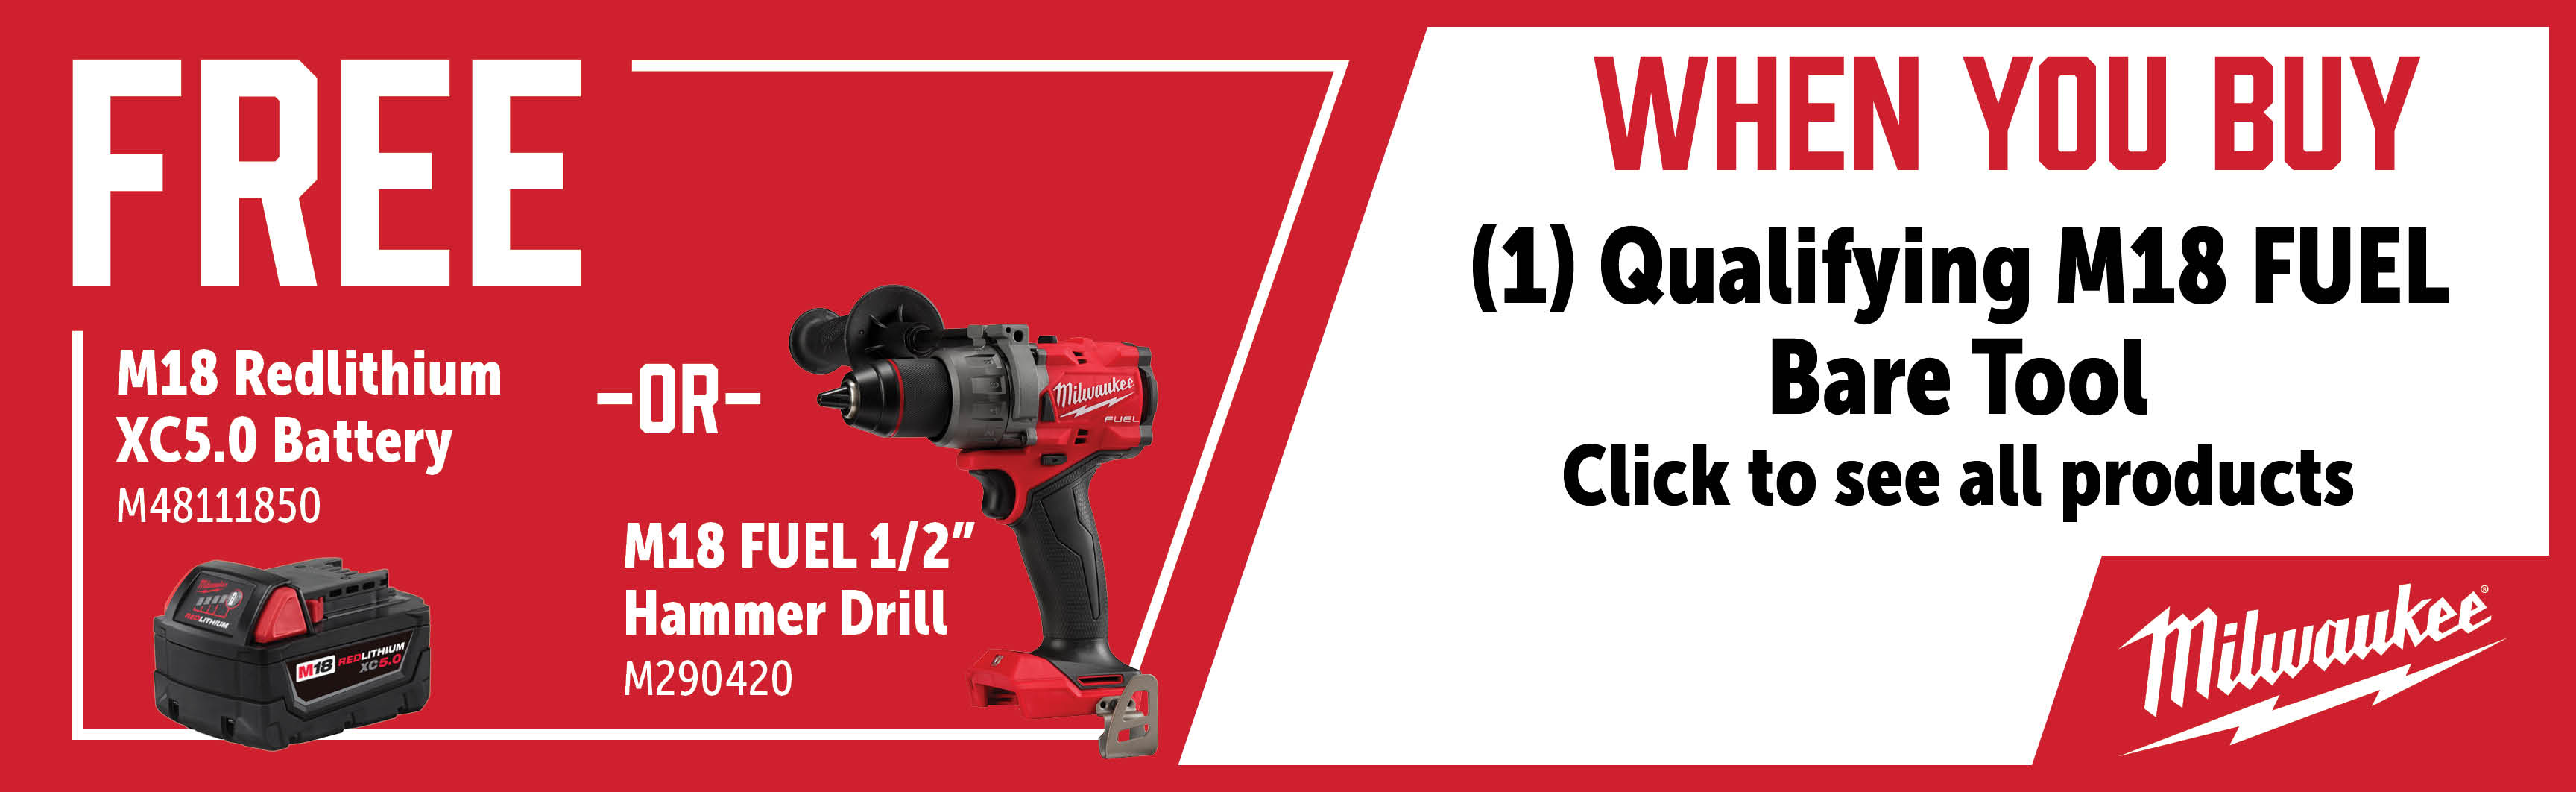 Milwaukee Aug-Oct: Buy a Qualifying M18 Fuel Bare Tool and Get a Free M18 Battery or 1/2" Hammer Drill